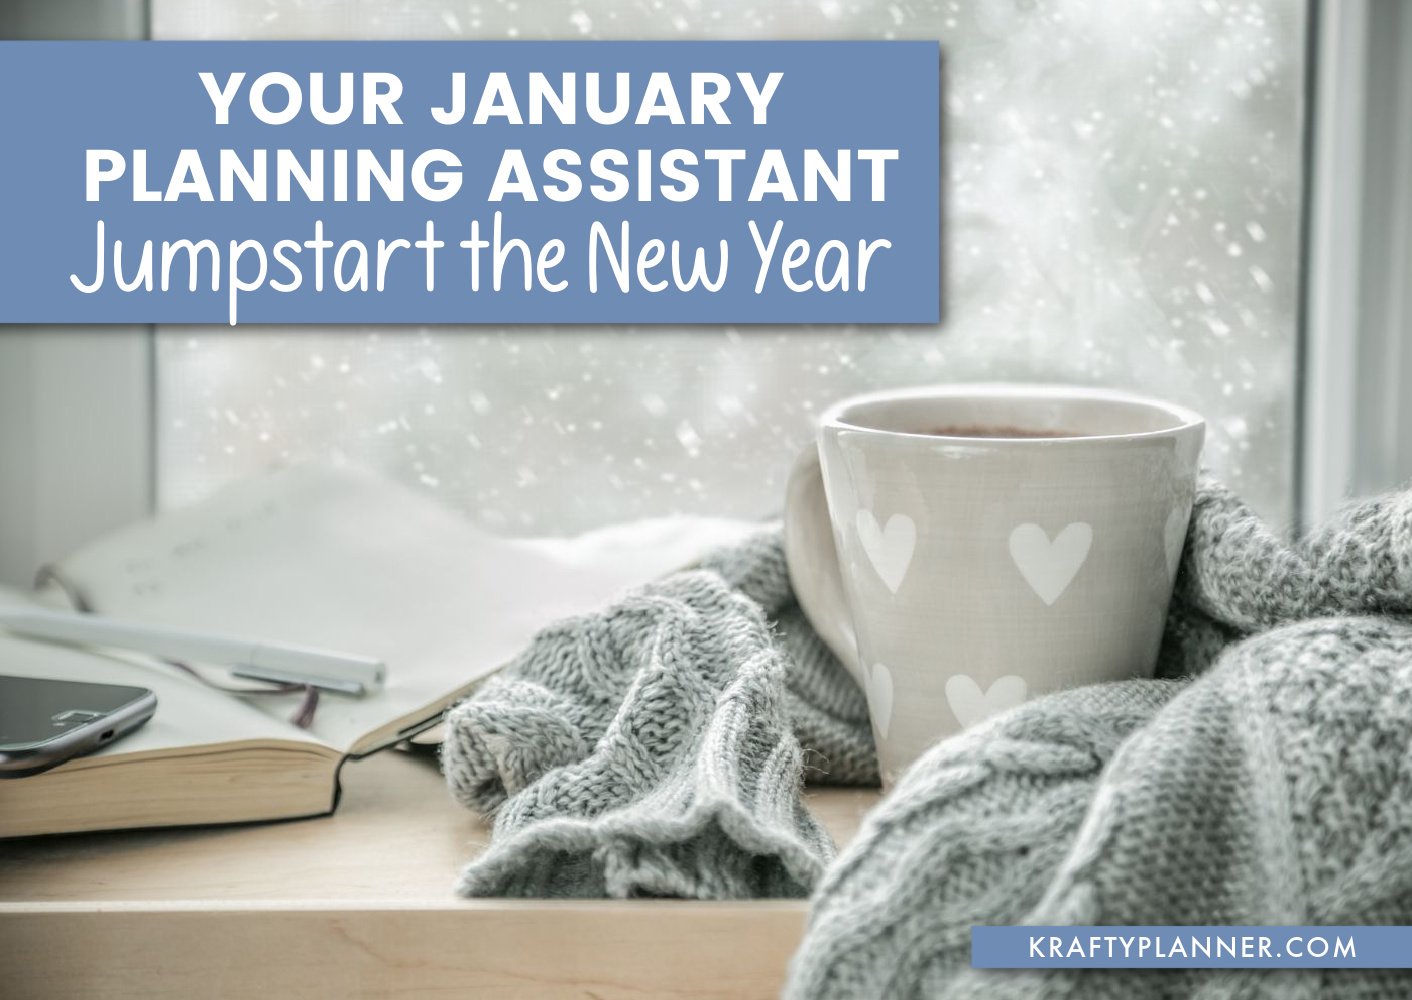 Your January Planning Assistant: Jumpstart the New Year!